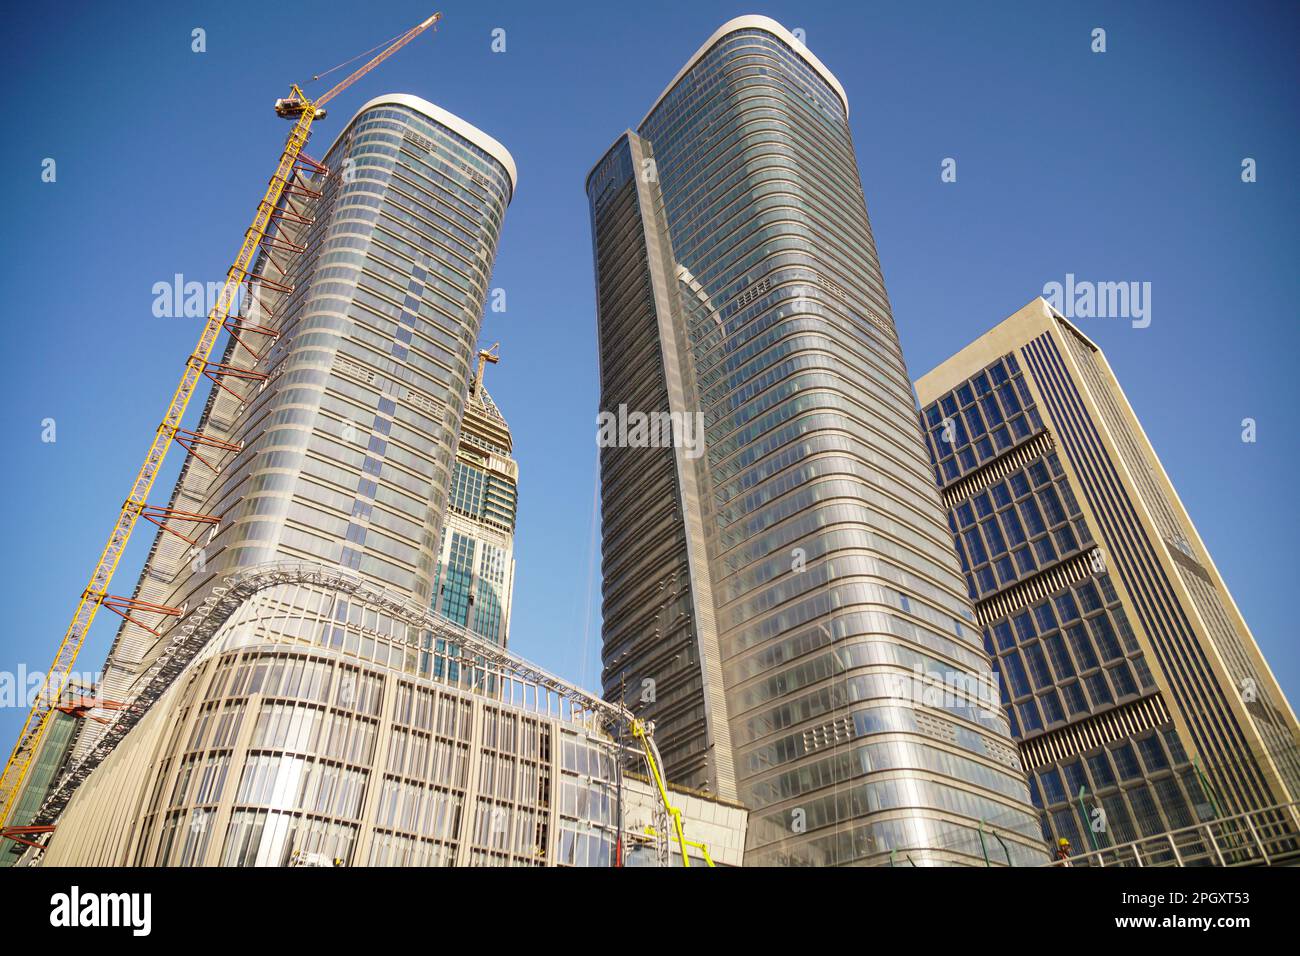 Istanbul Finance Center (IFC) project started in 2009 and is being developed in the Ataşehir district on the city’s Anatolian side. Stock Photo